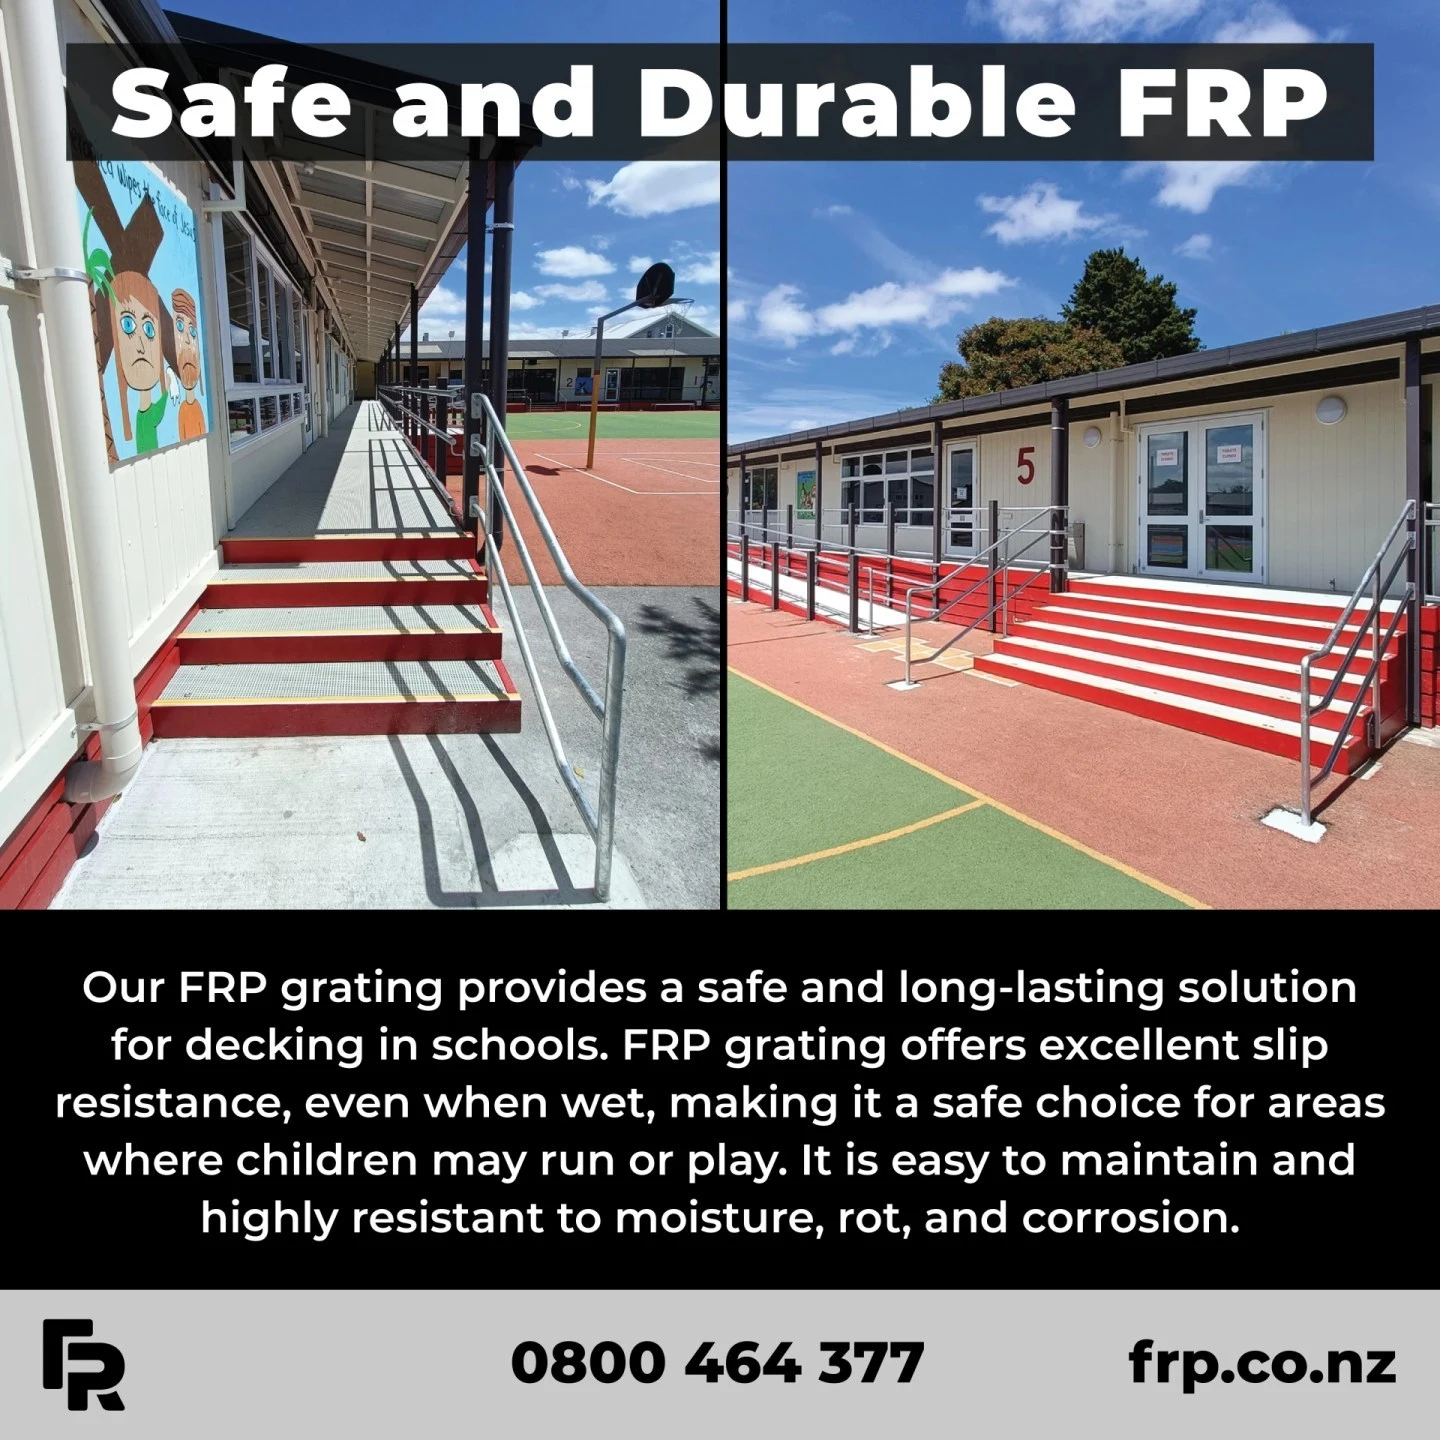 Got questions about which grating solution is right for your project? Drop us a message, and our team of experts will be happy to assist you!

#frp #frpproducts #grating #walkways #decking #construction #schools #nonslip